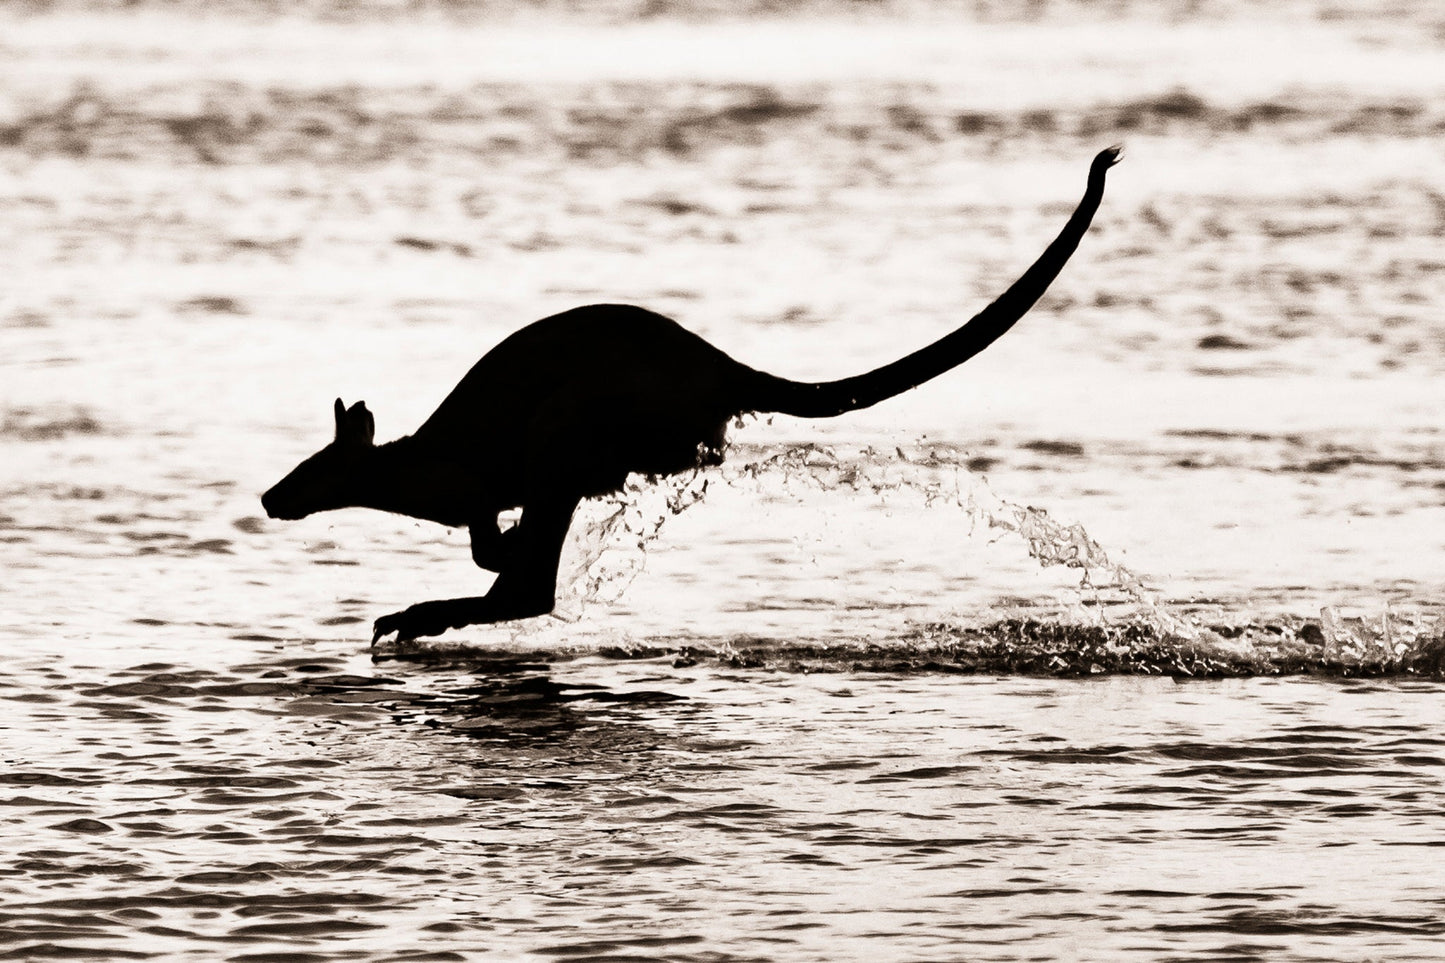 Hopping on water - Kangaroo, Hastings Point New South Wales